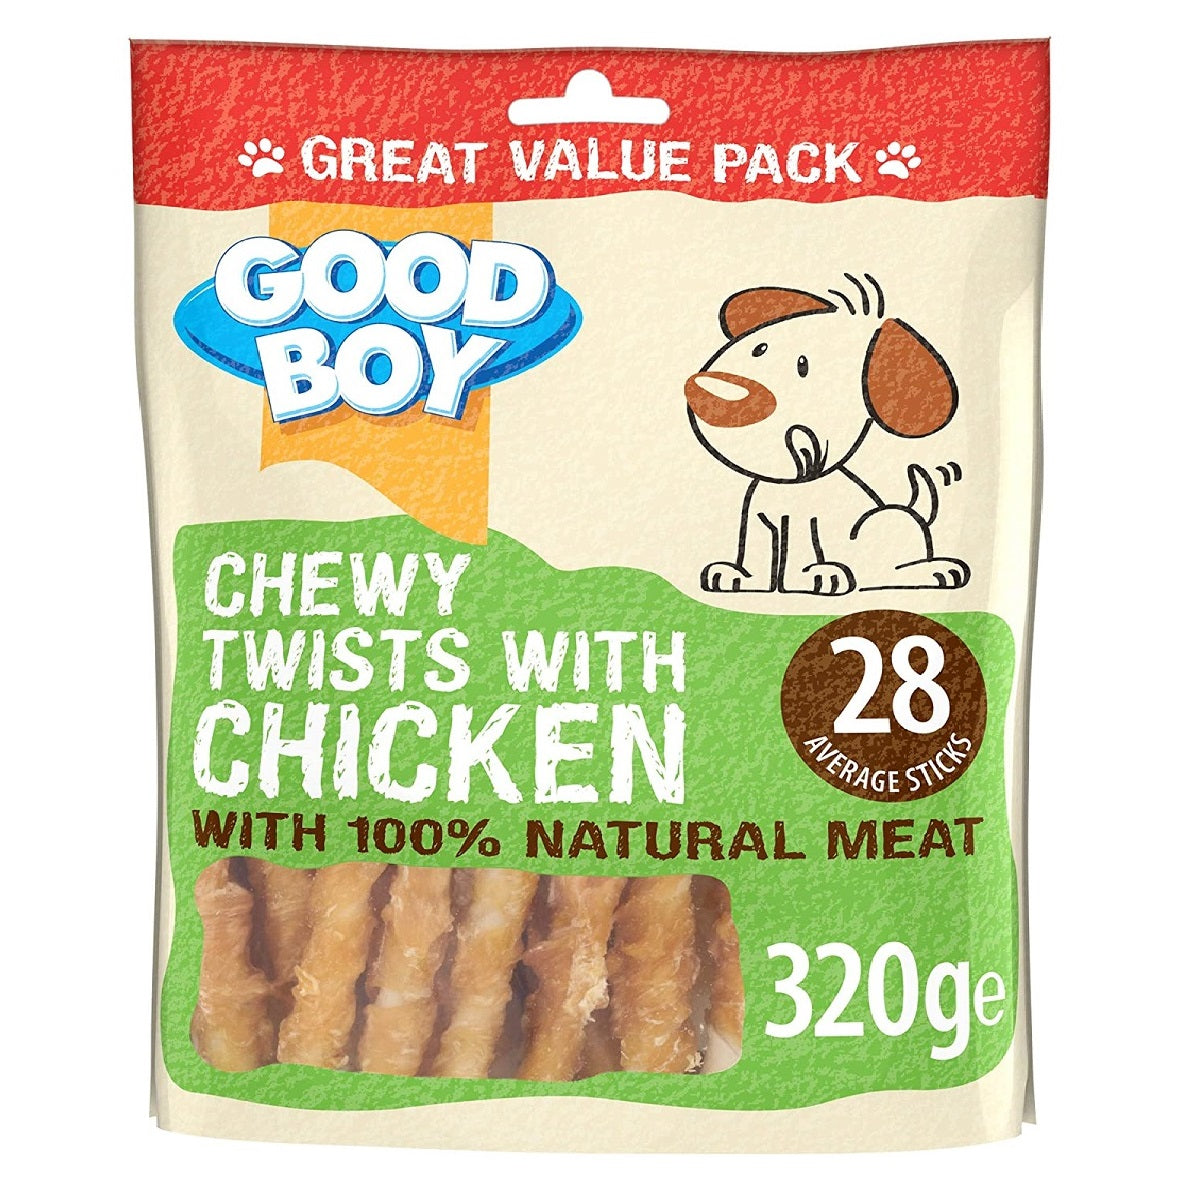 Good Boy - Chewy Twists with Chicken (320g)